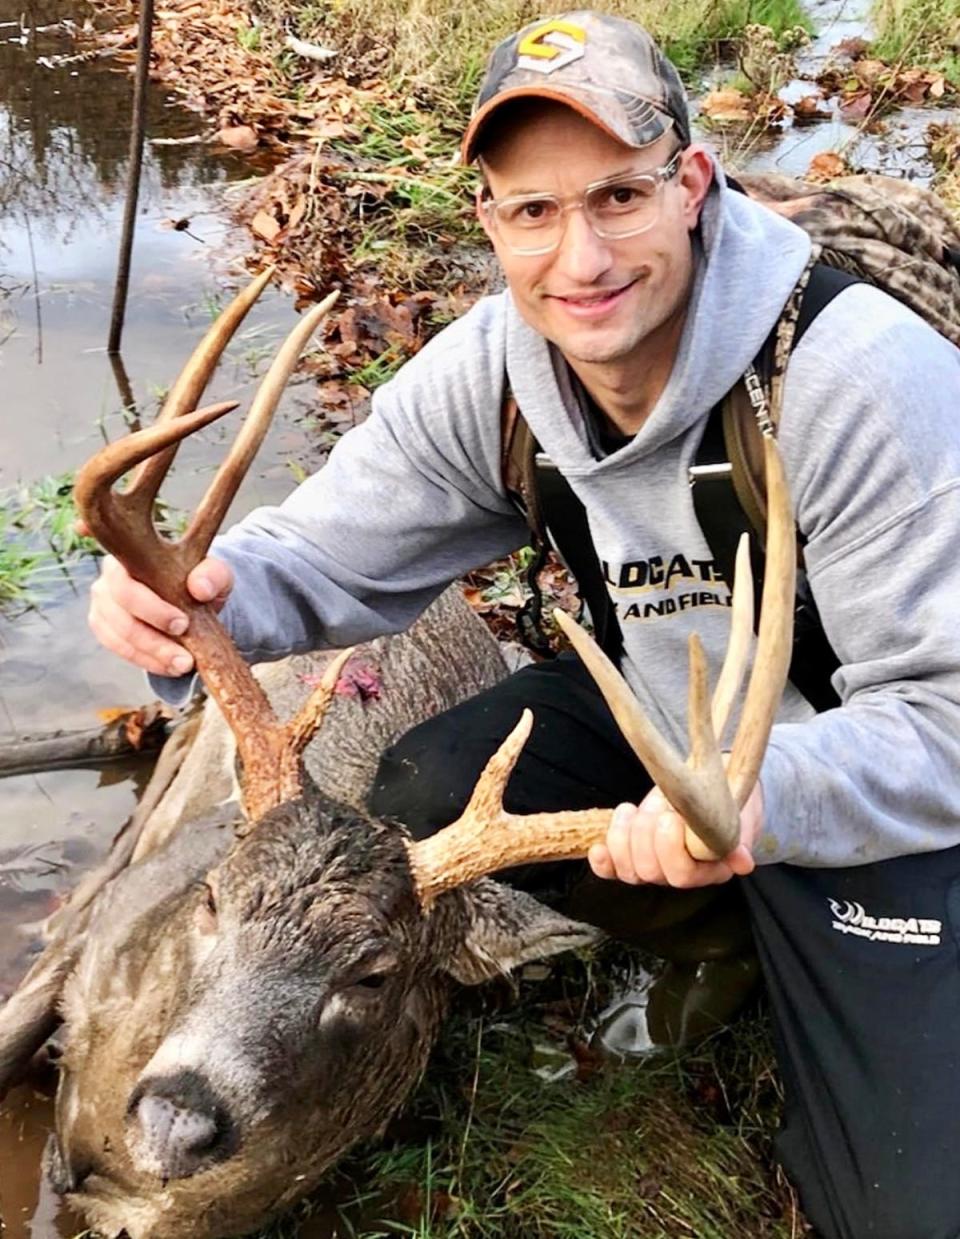 Longtime local hunter Justin Collins harvested this beautiful 9-pointer while patrolling the woods near Waymart. He used a Martin compound bow to make the shot from about 25 yards.